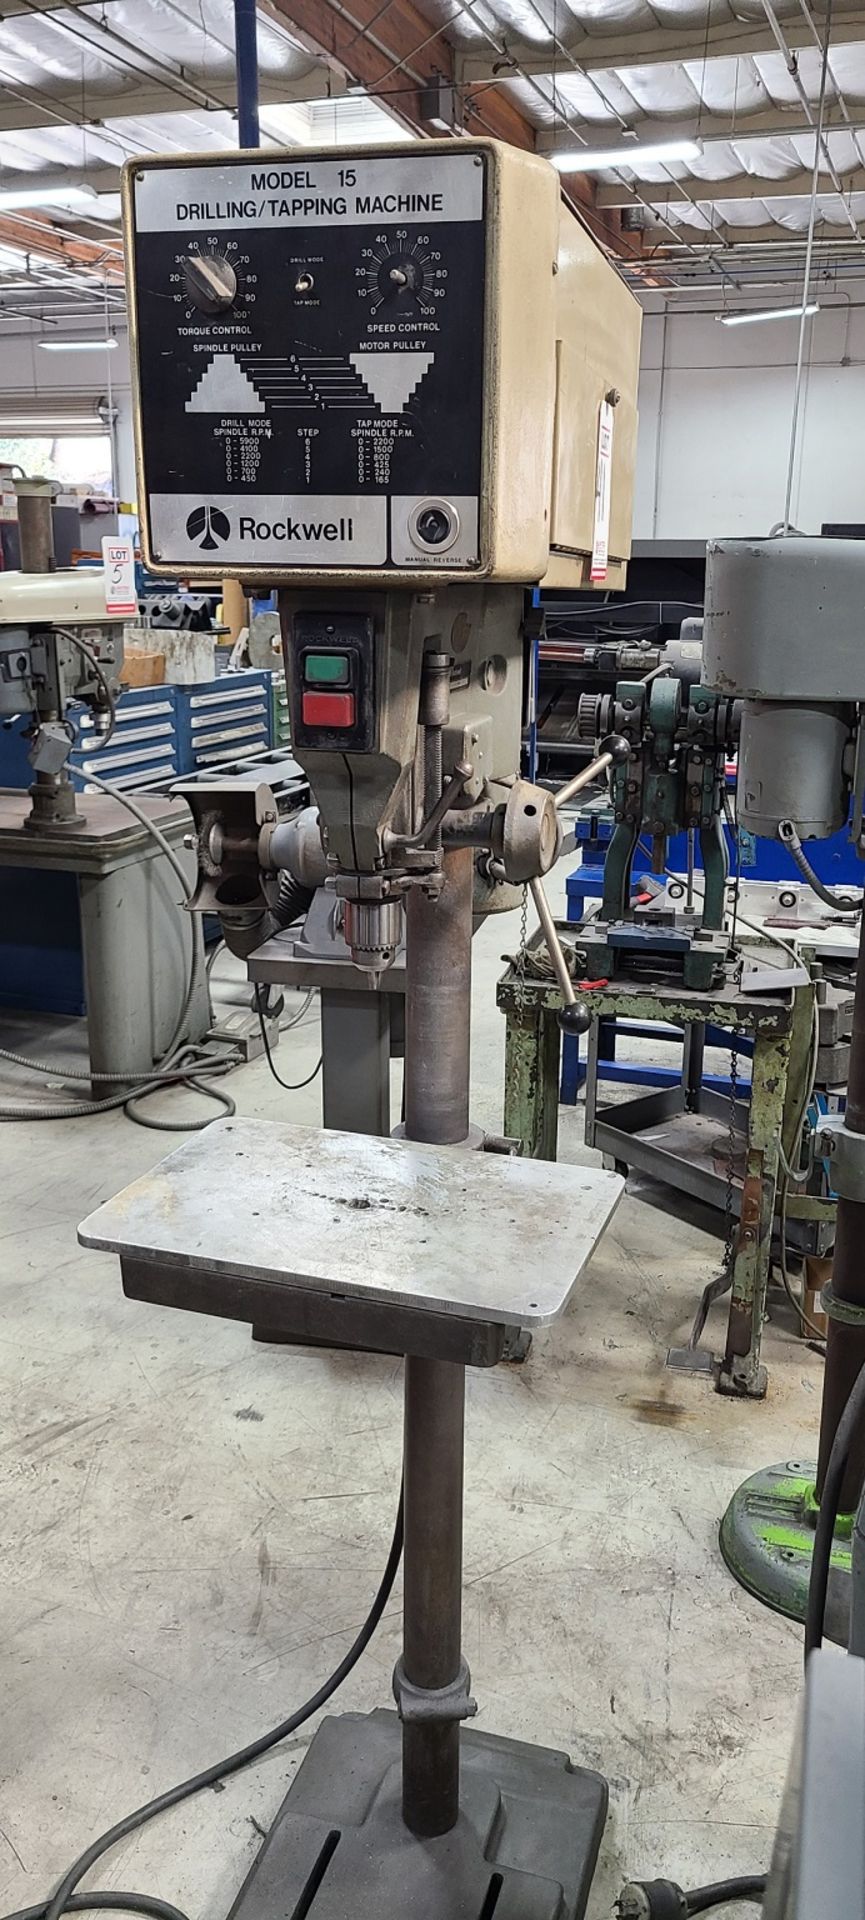 ROCKWELL MODEL 15 DRILLING/TAPPING MACHINE